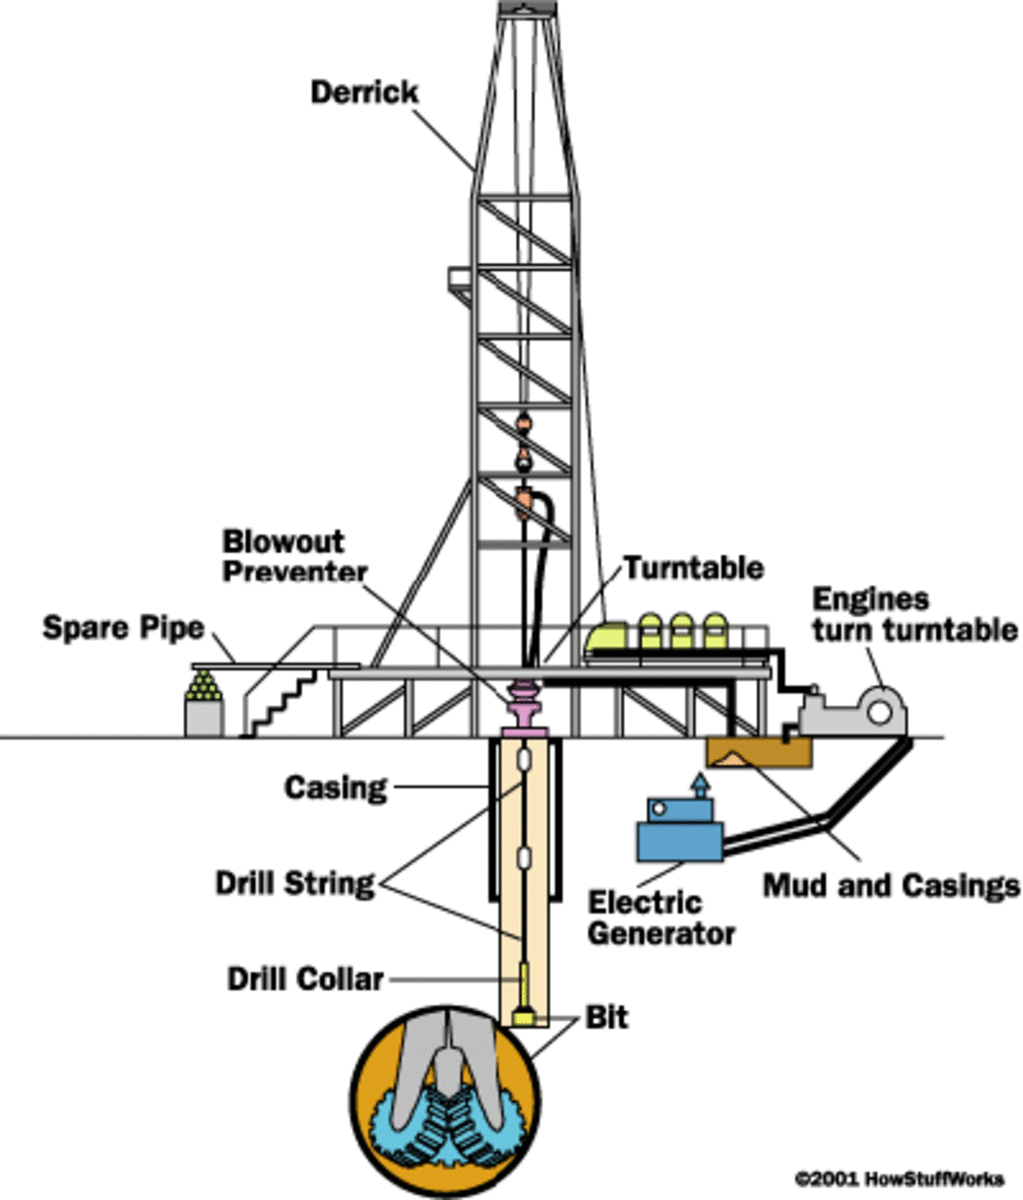 Diagram of an Oil Well